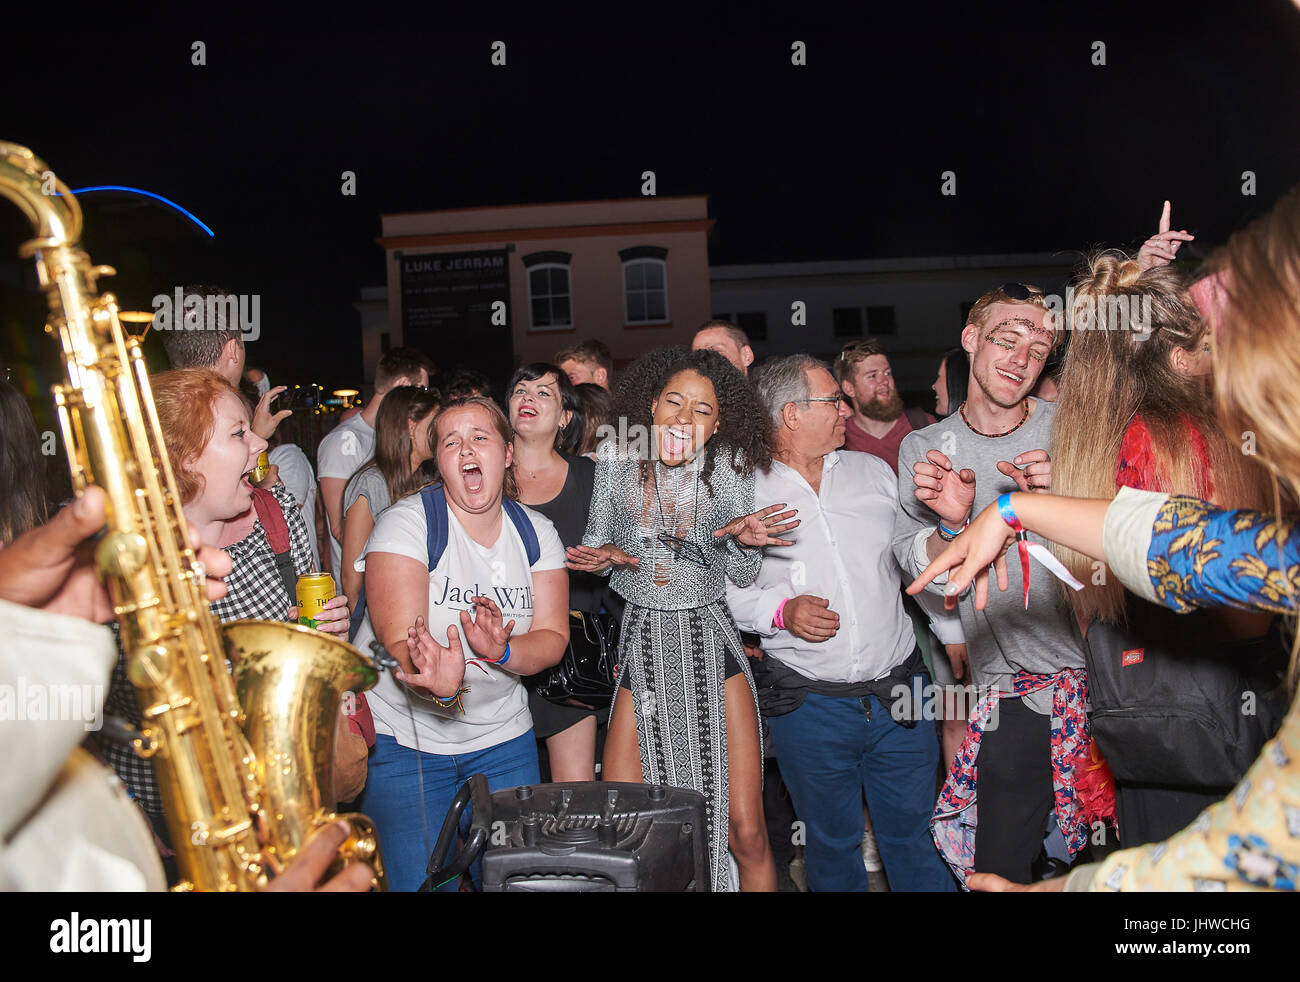 BRISTOL, ENGLAND - JULY 8: Men and women dance and sing as a Saxophonist busks at night at Bristol Waterfront on July 8, 2017 Stock Photo